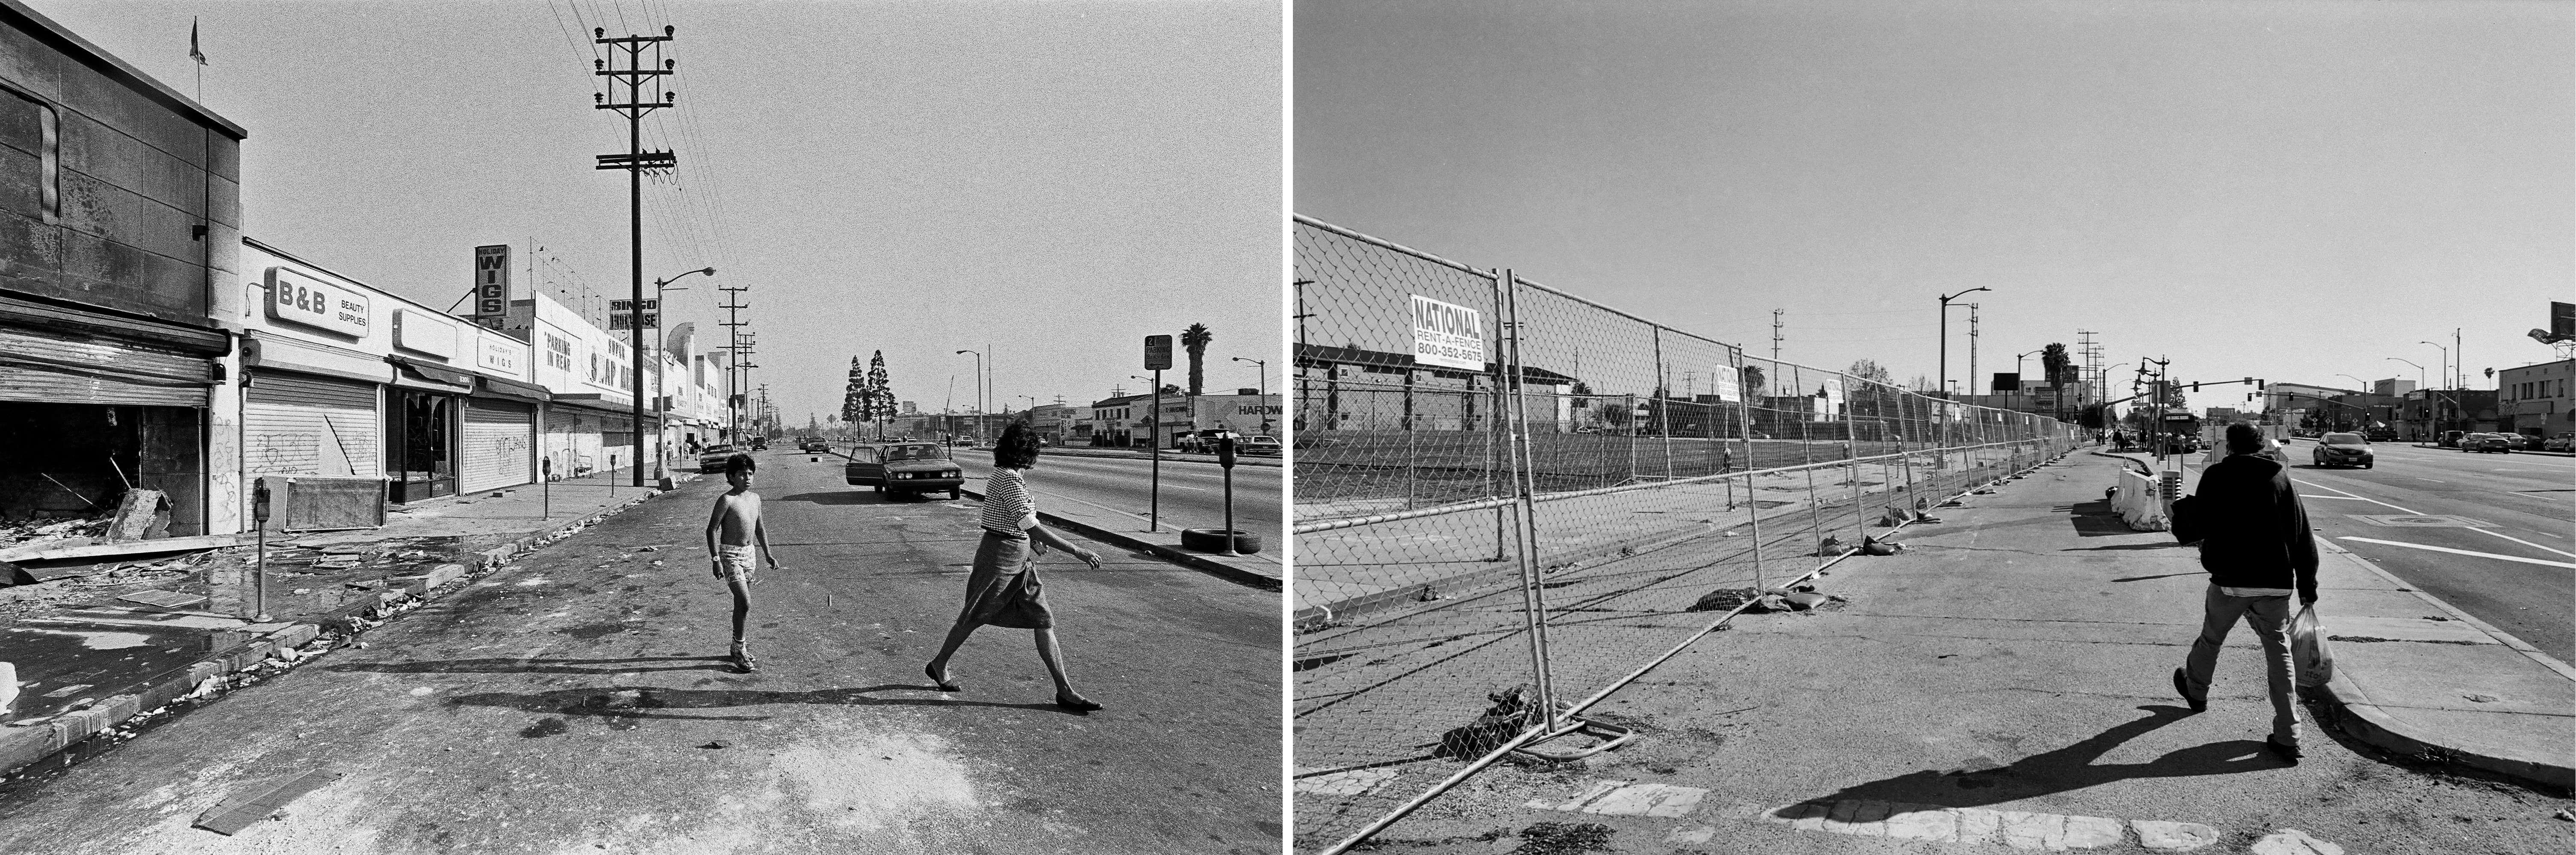 Two pictures are shown side by side: Both scenes show an open road with people walking across it.